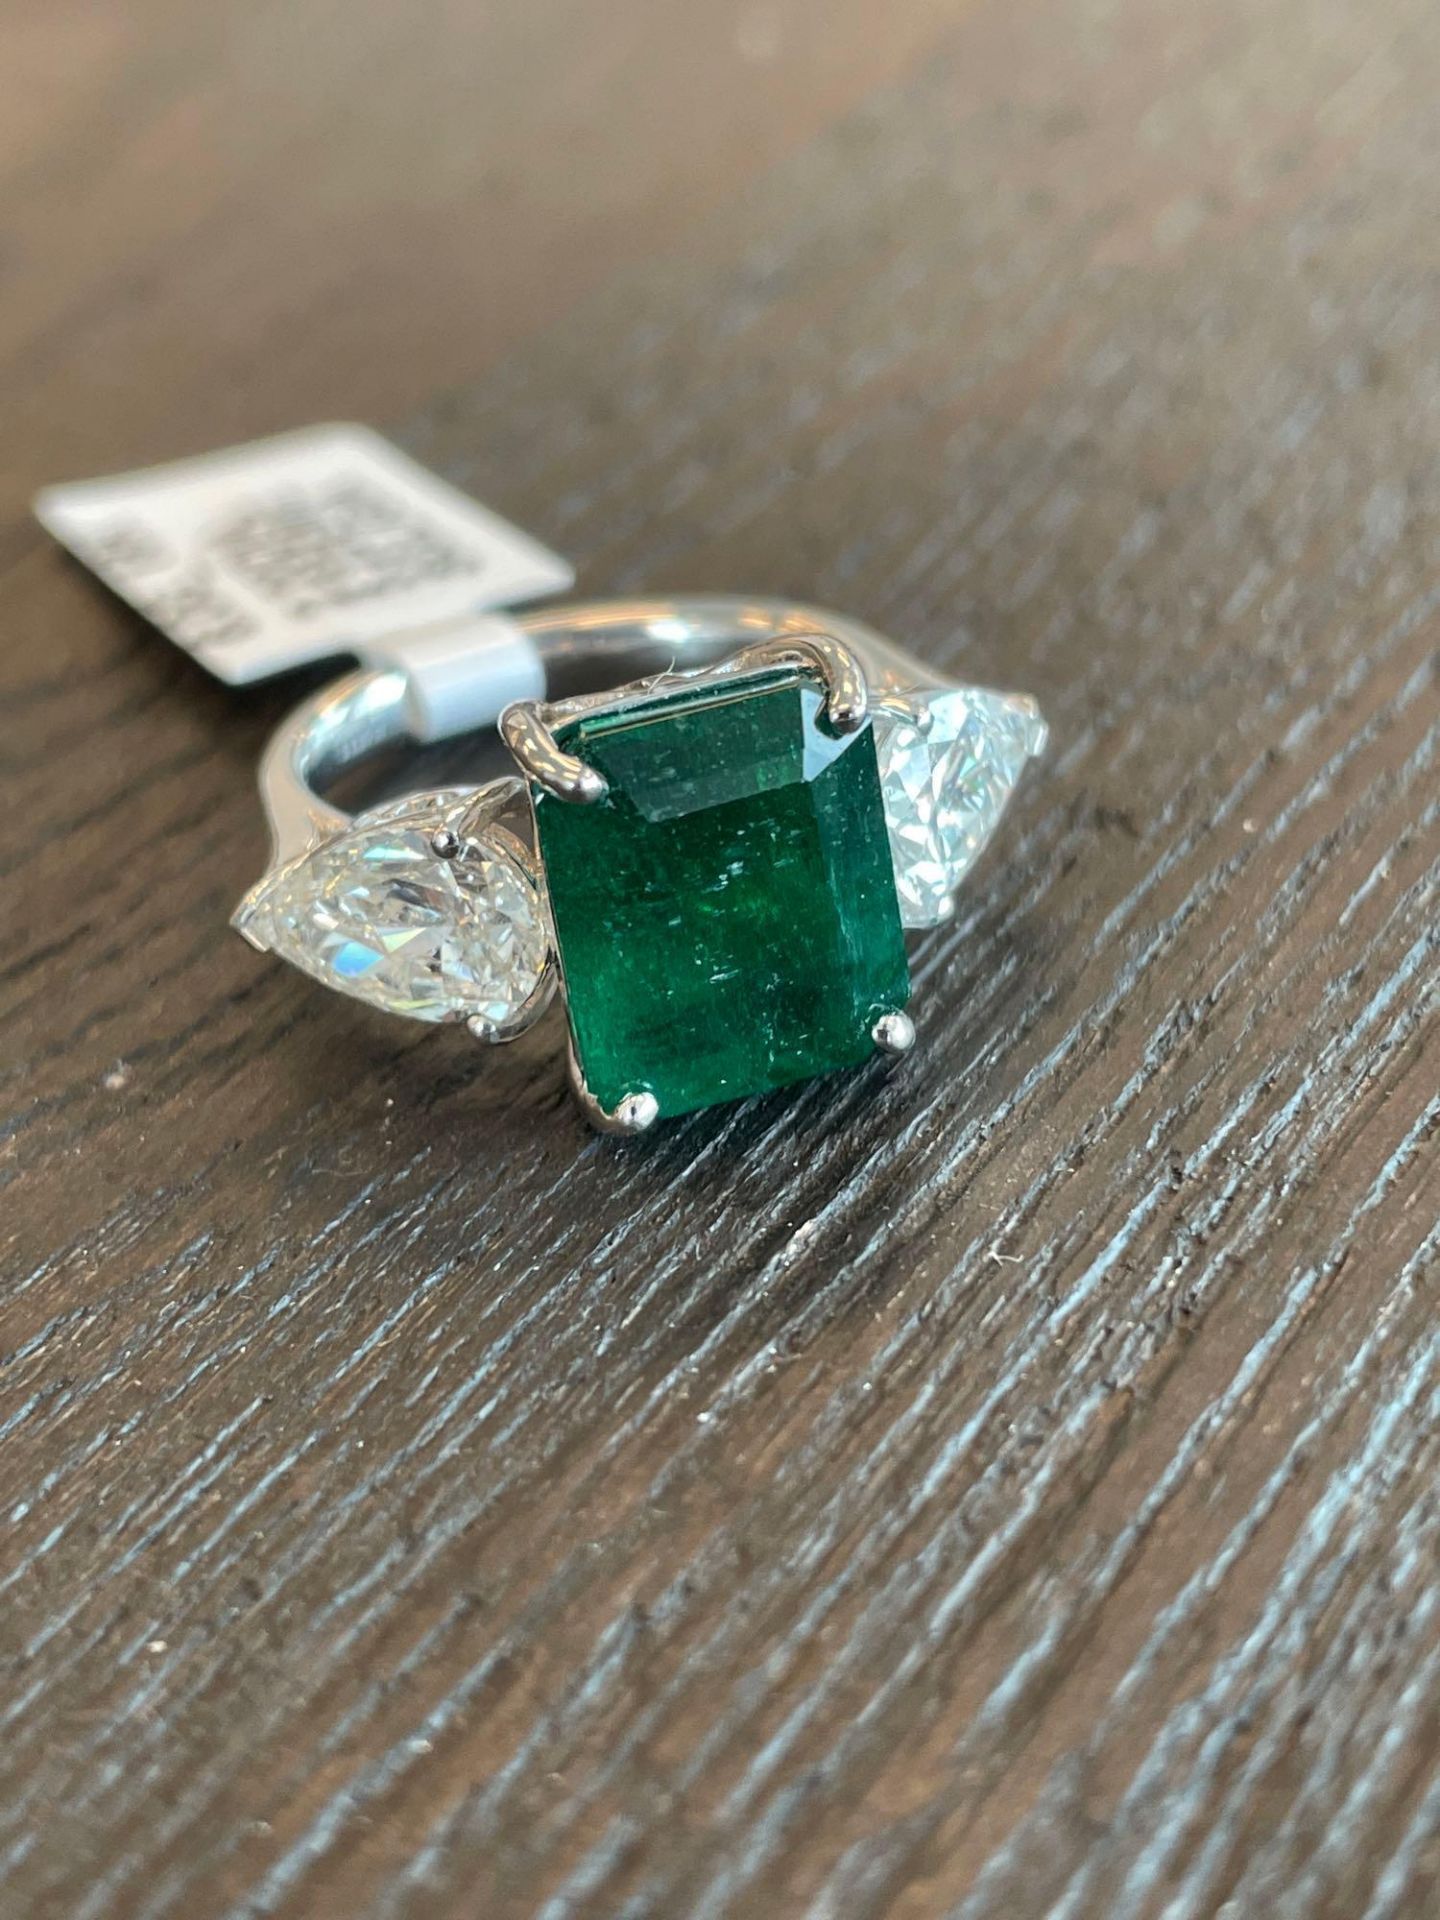 Orianne 18k White Gold Emerald & Diamond Ring 6.01 grams tw. 5.22cts Emerald/ 2.20 cts Diamonds - Image 7 of 10